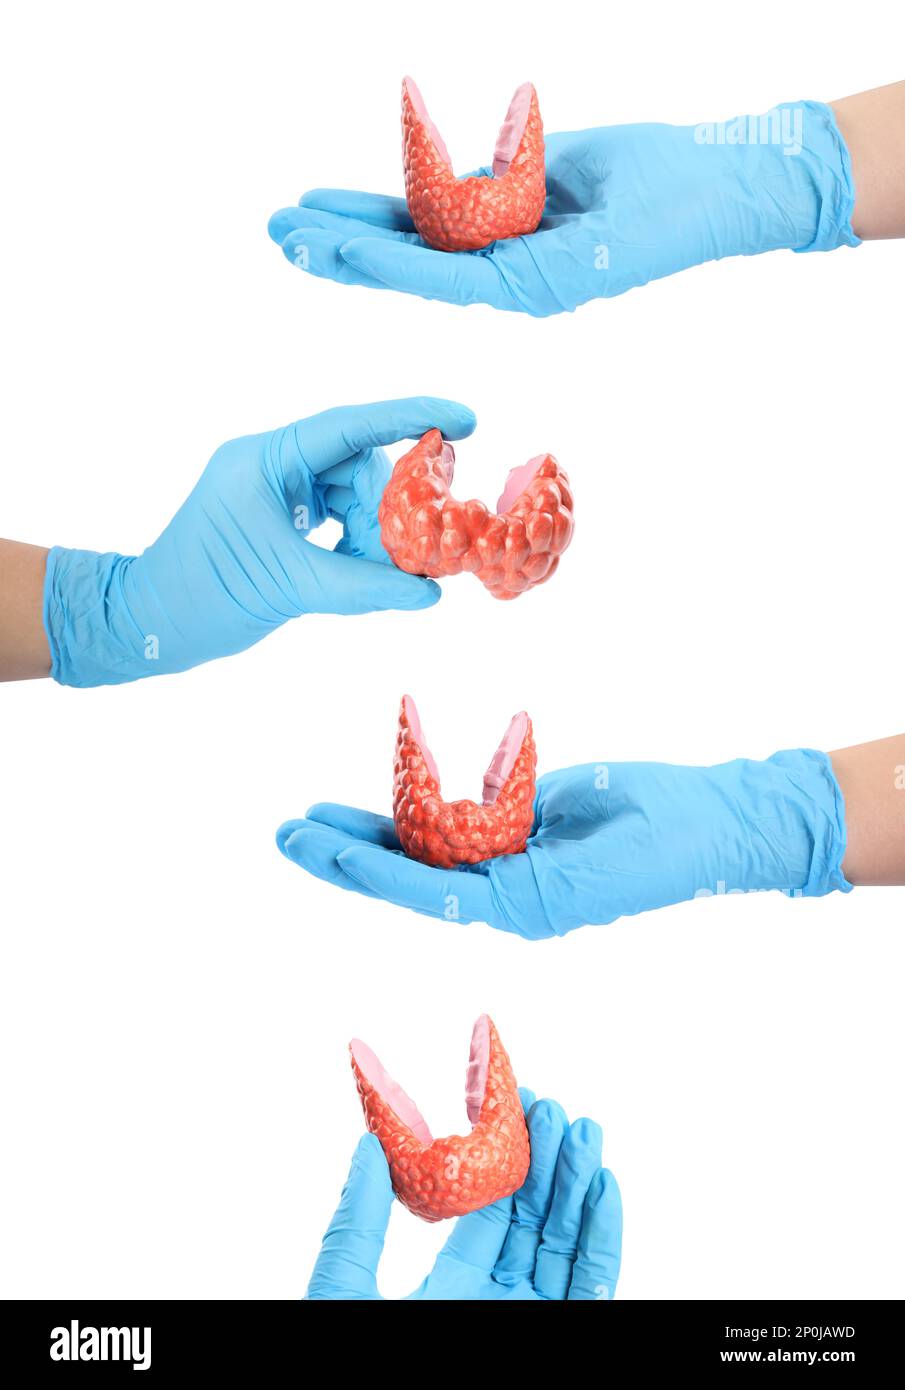 Doctors holding plastic models of healthy and afflicted thyroid on white background, closeup. Collage Stock Photo